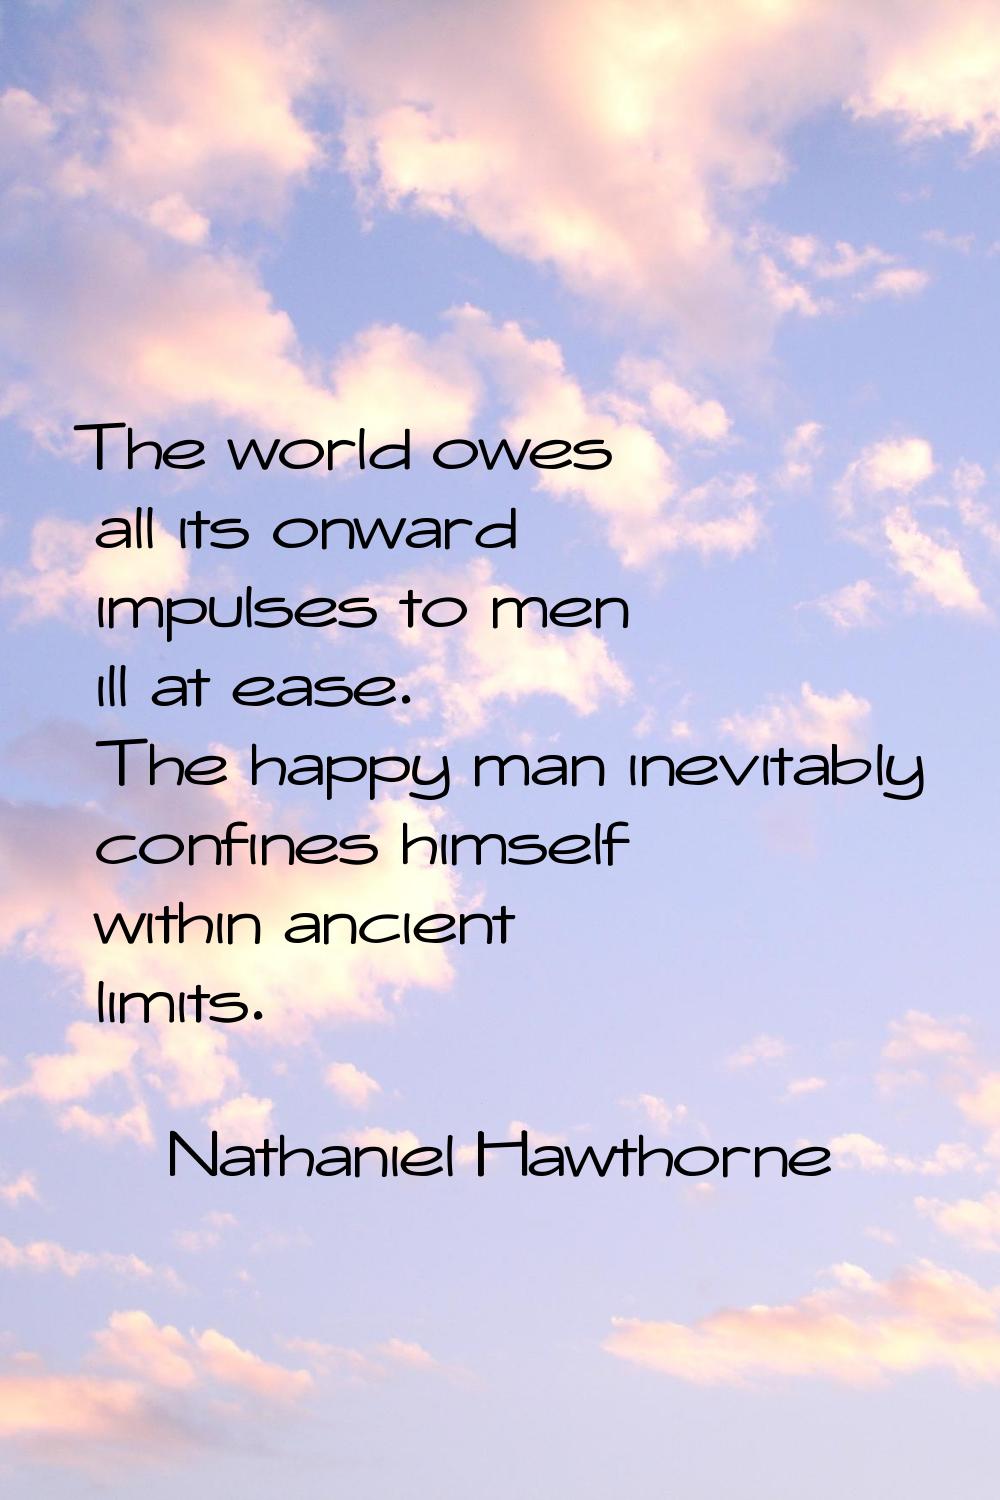 The world owes all its onward impulses to men ill at ease. The happy man inevitably confines himsel